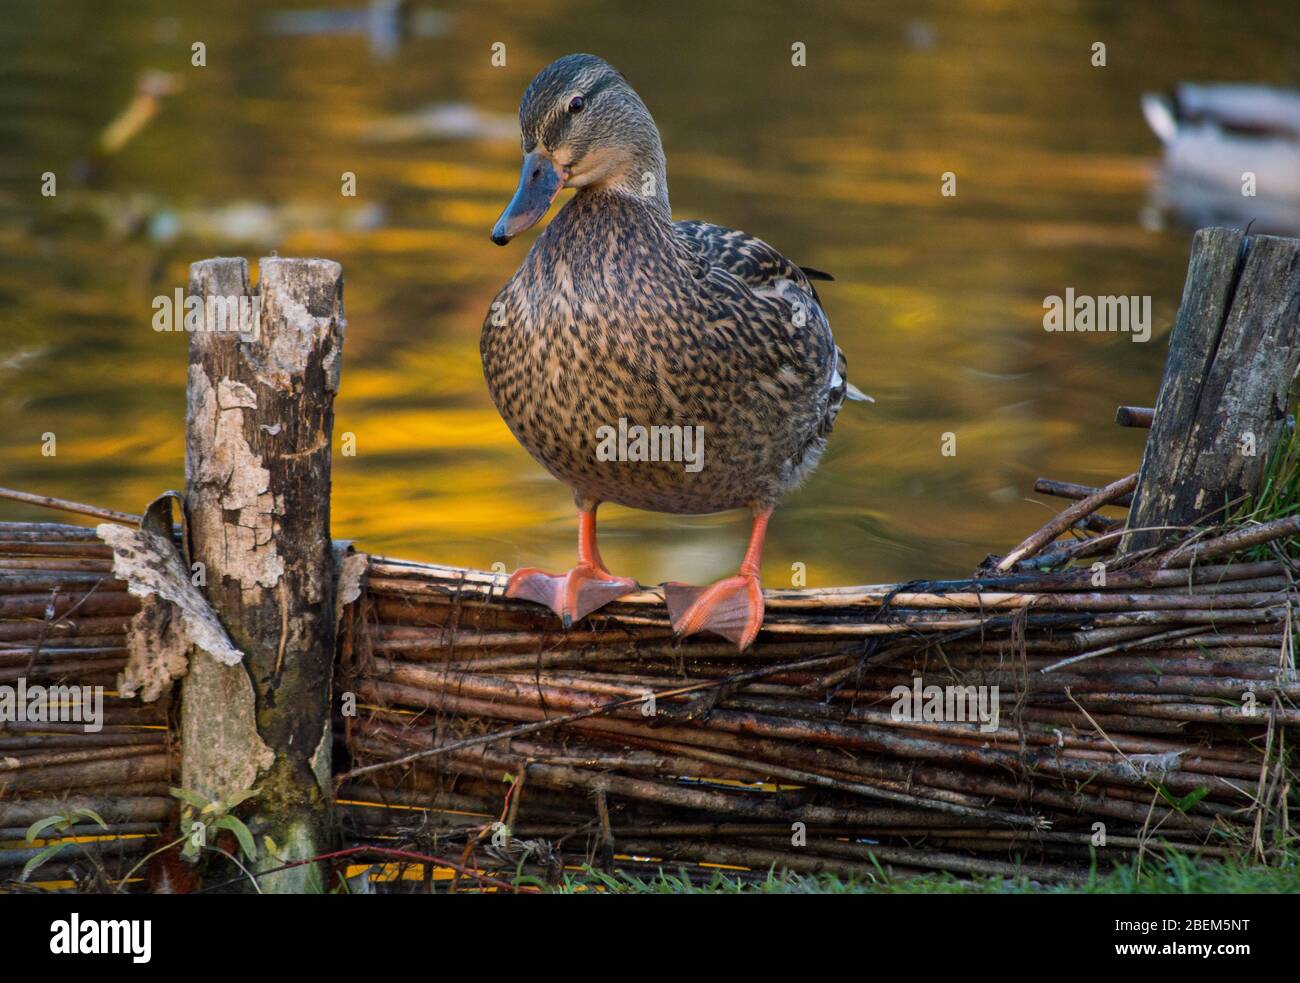 Close up portrait of a mallard duck sitting on a wicker fence in the park with blurry pond behind, wildlife reserve with cute ducks, brown mallards in Stock Photo